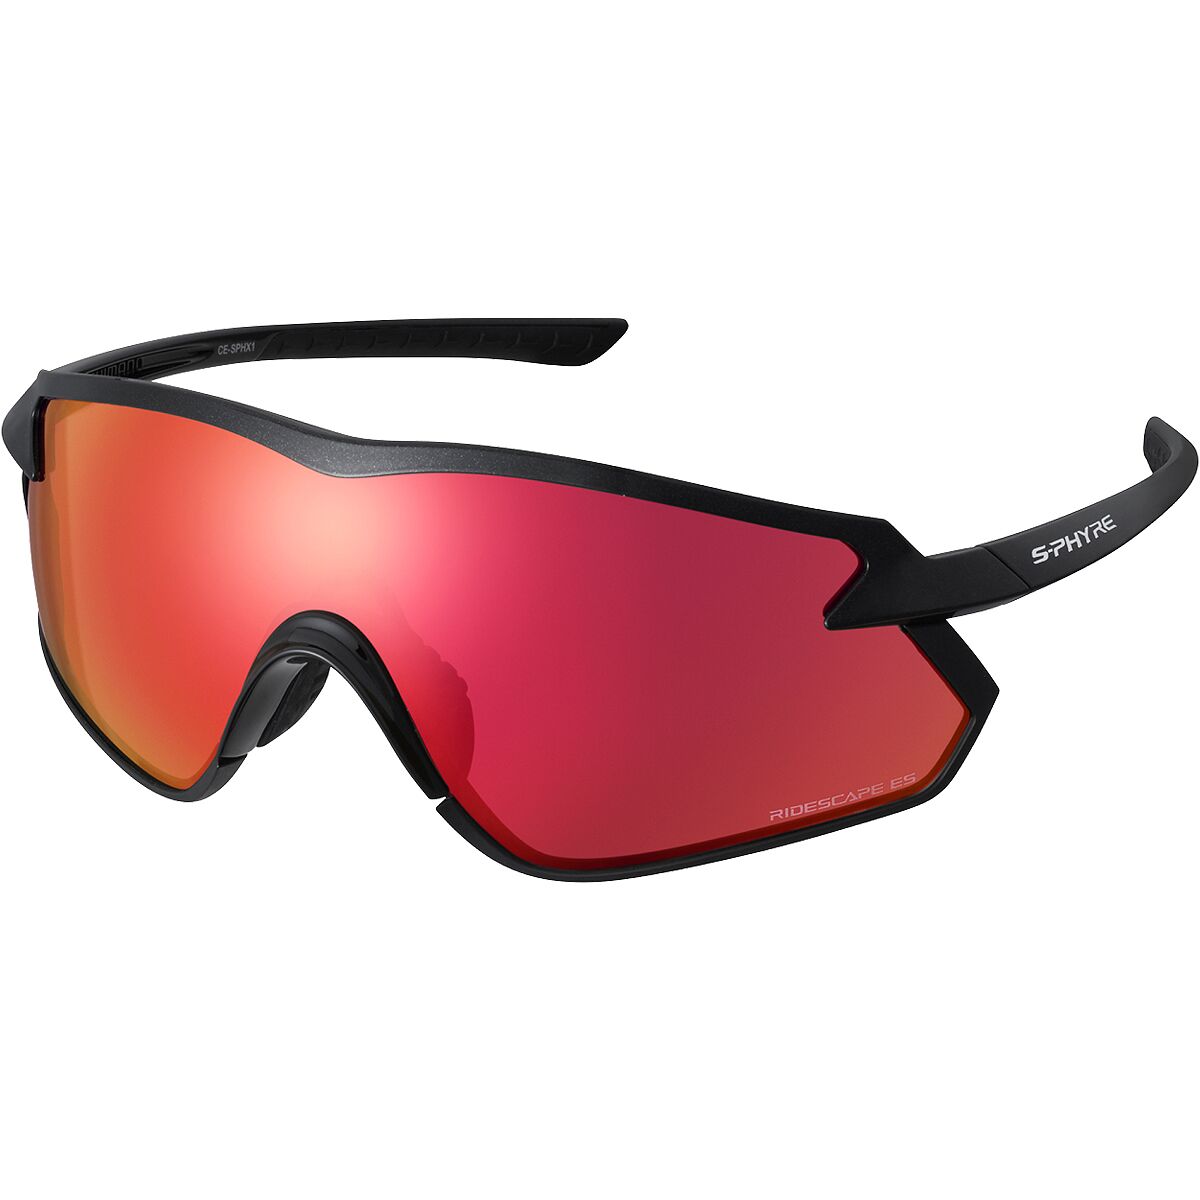 Shimano S-PHYRE X Cycling Sunglasses - CE-SPHX1